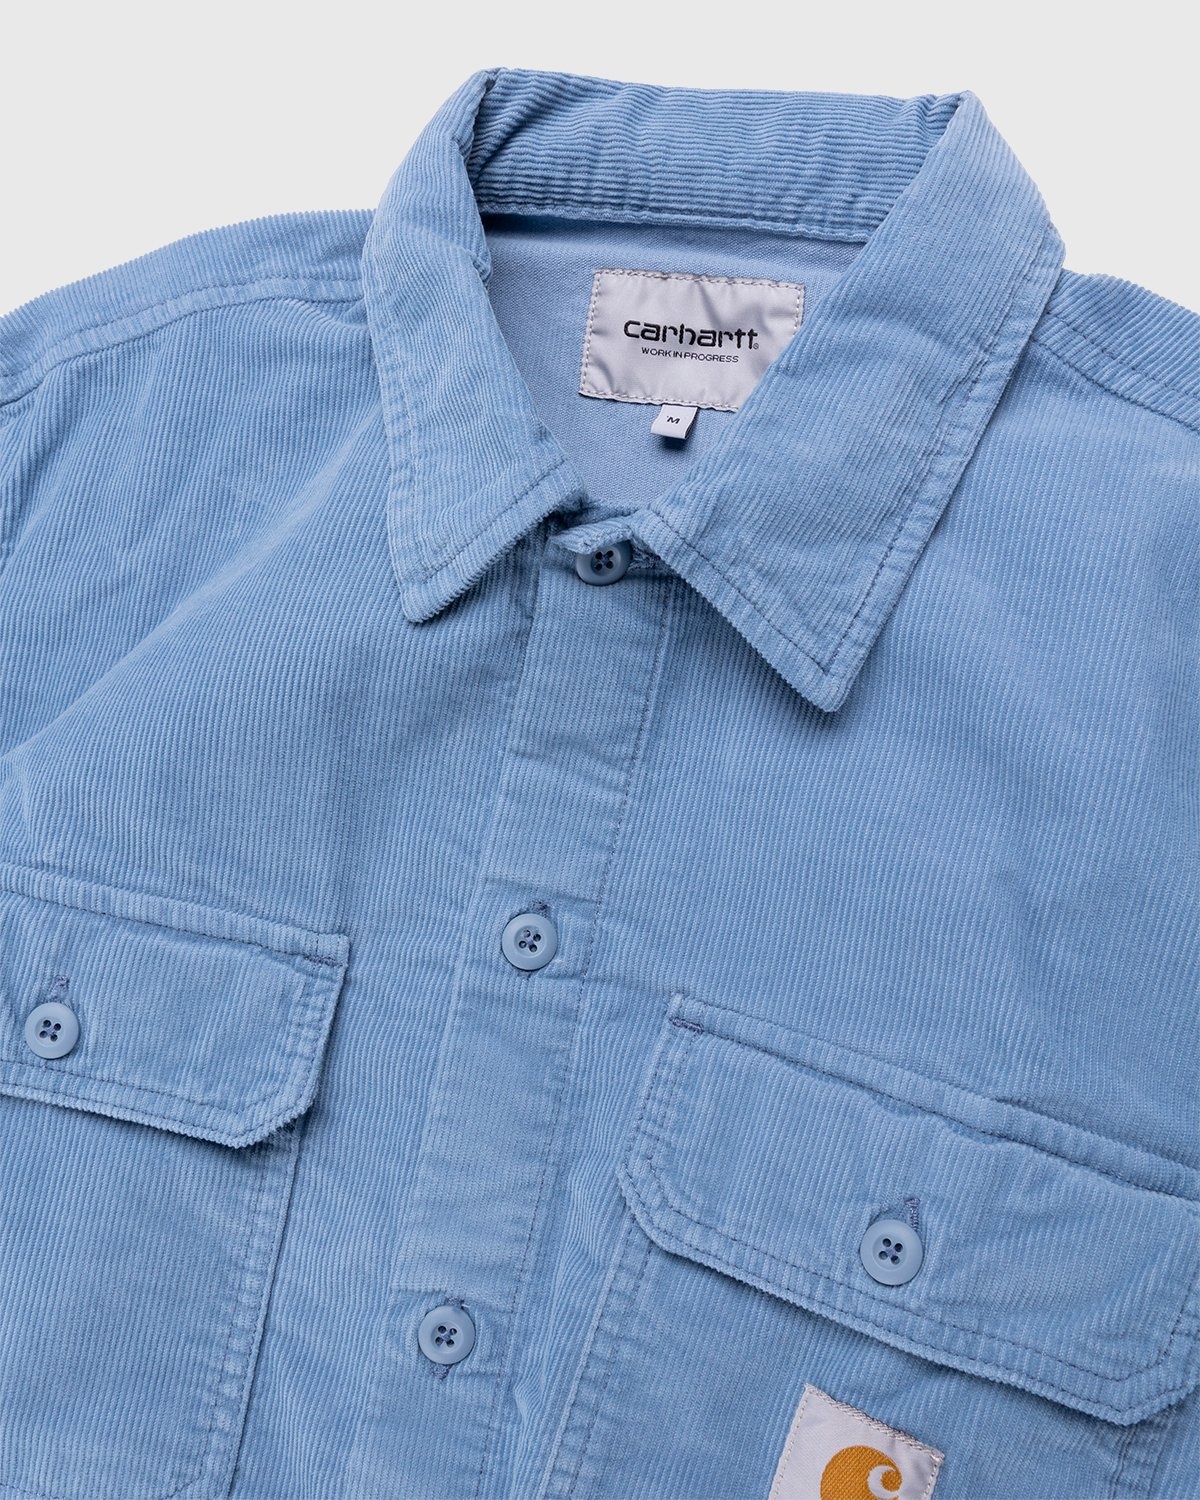 Carhartt WIP – Dixon Shirt Jacket Icy Water Rinsed - Outerwear - Blue - Image 3